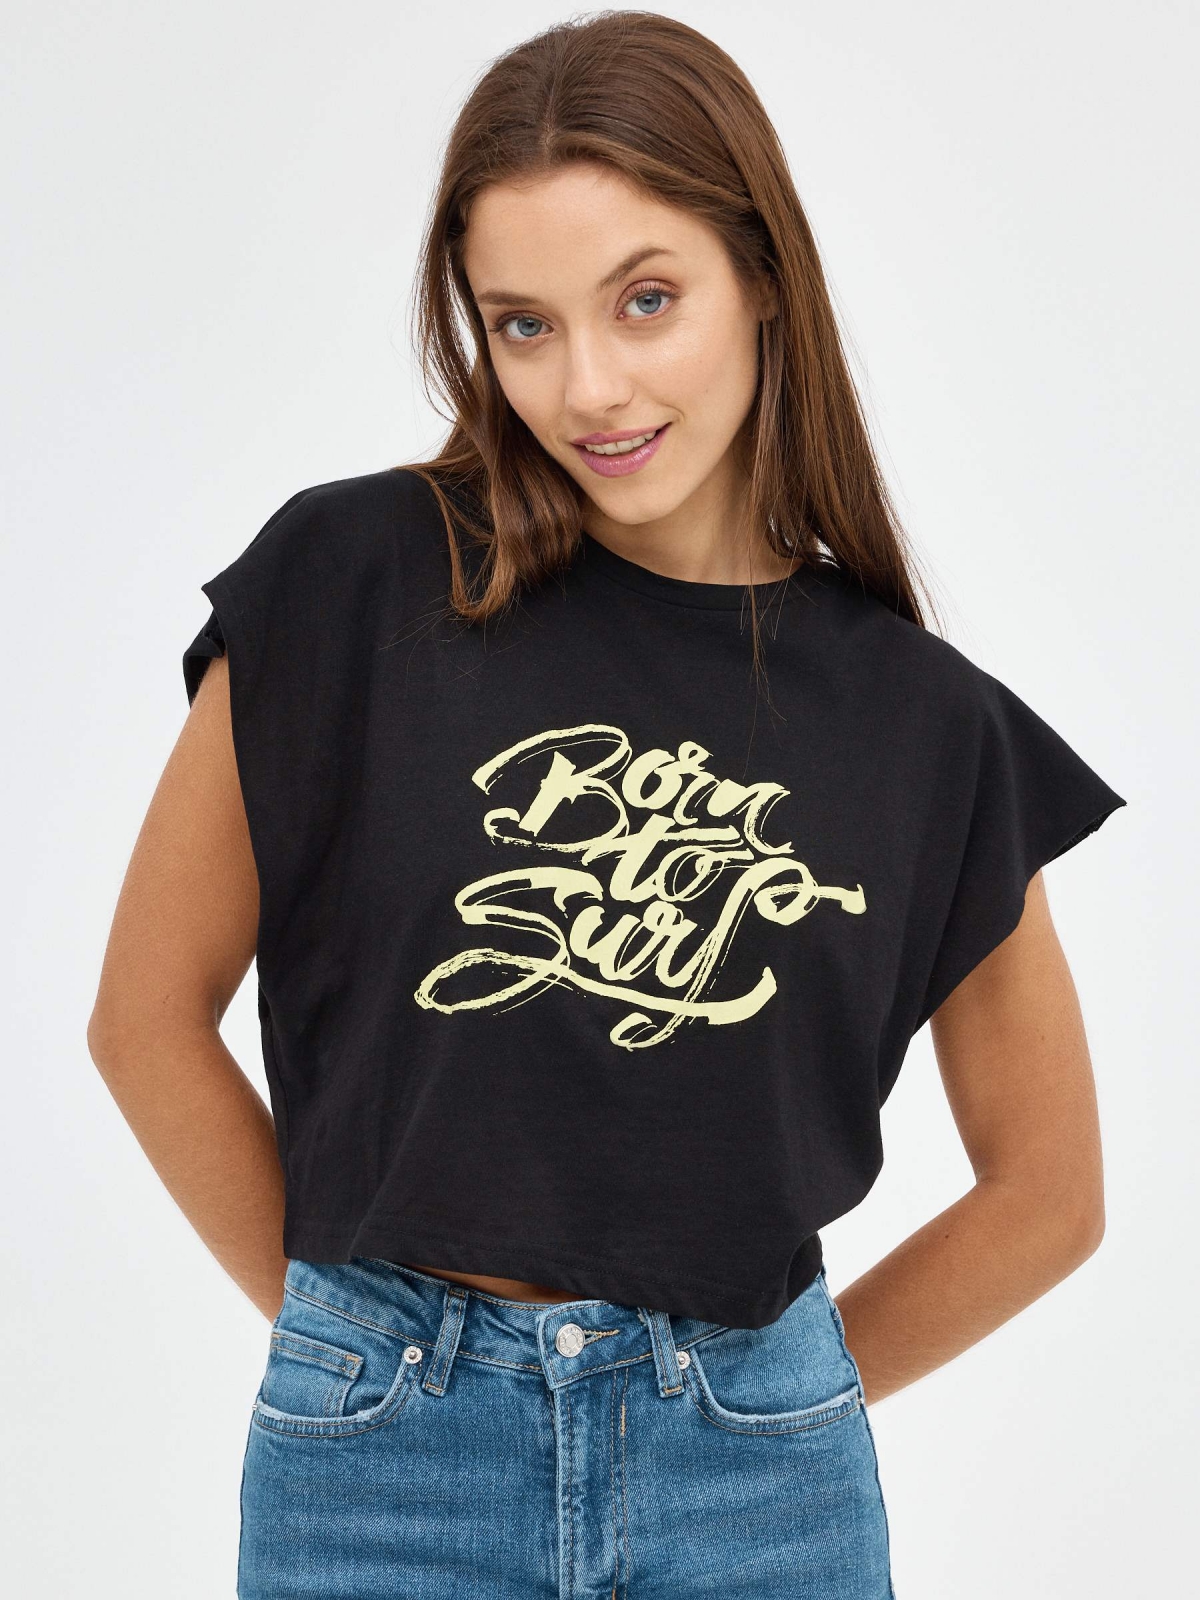 Born To Surf T-Shirt black middle front view